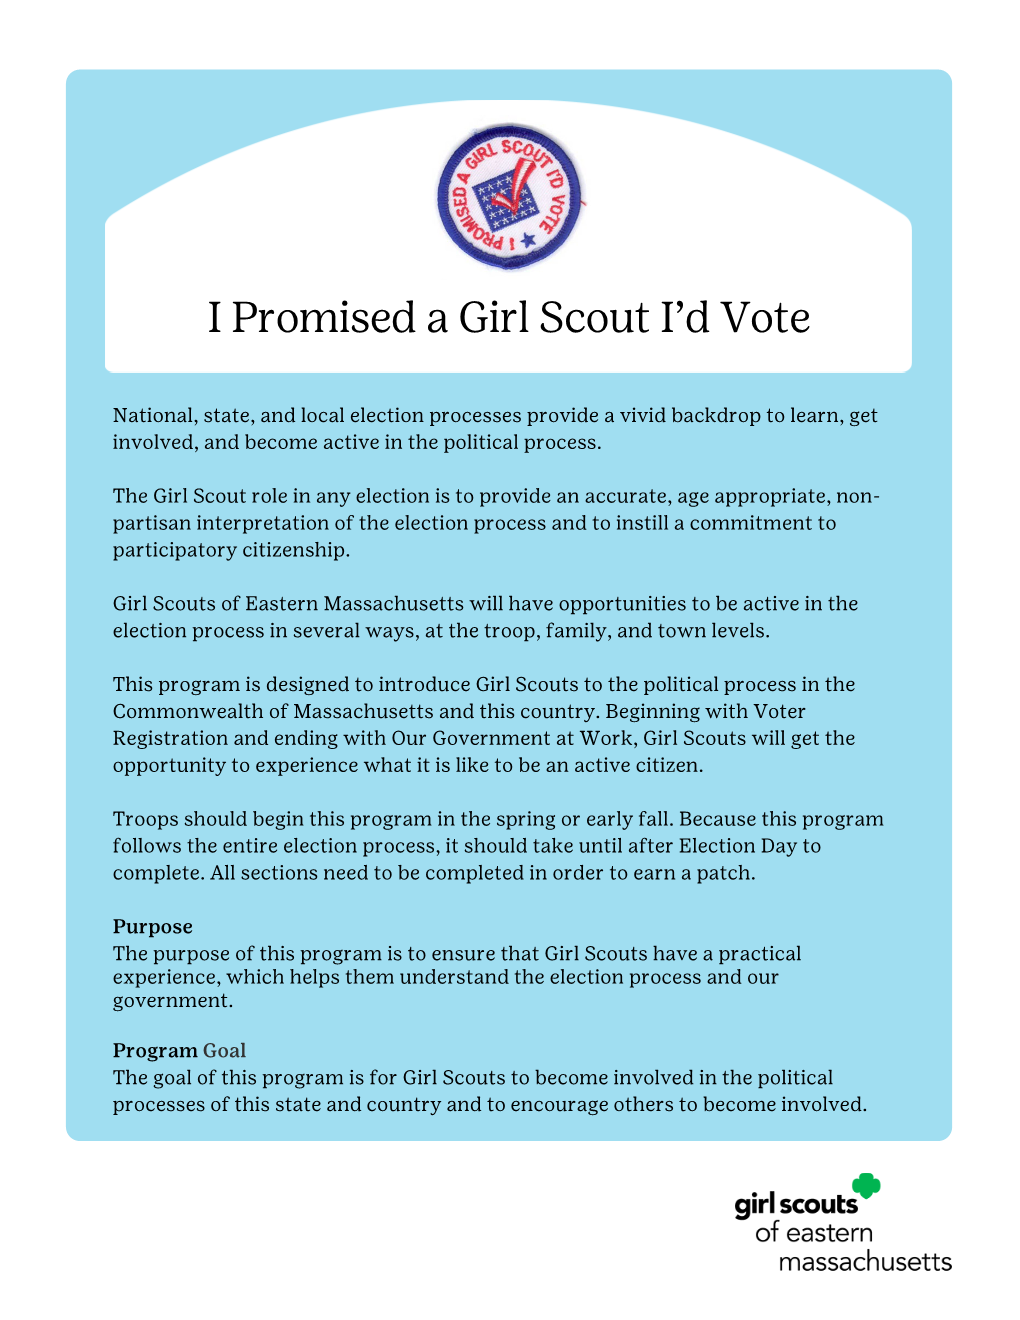 I Promised a Girl Scout I'd Vote